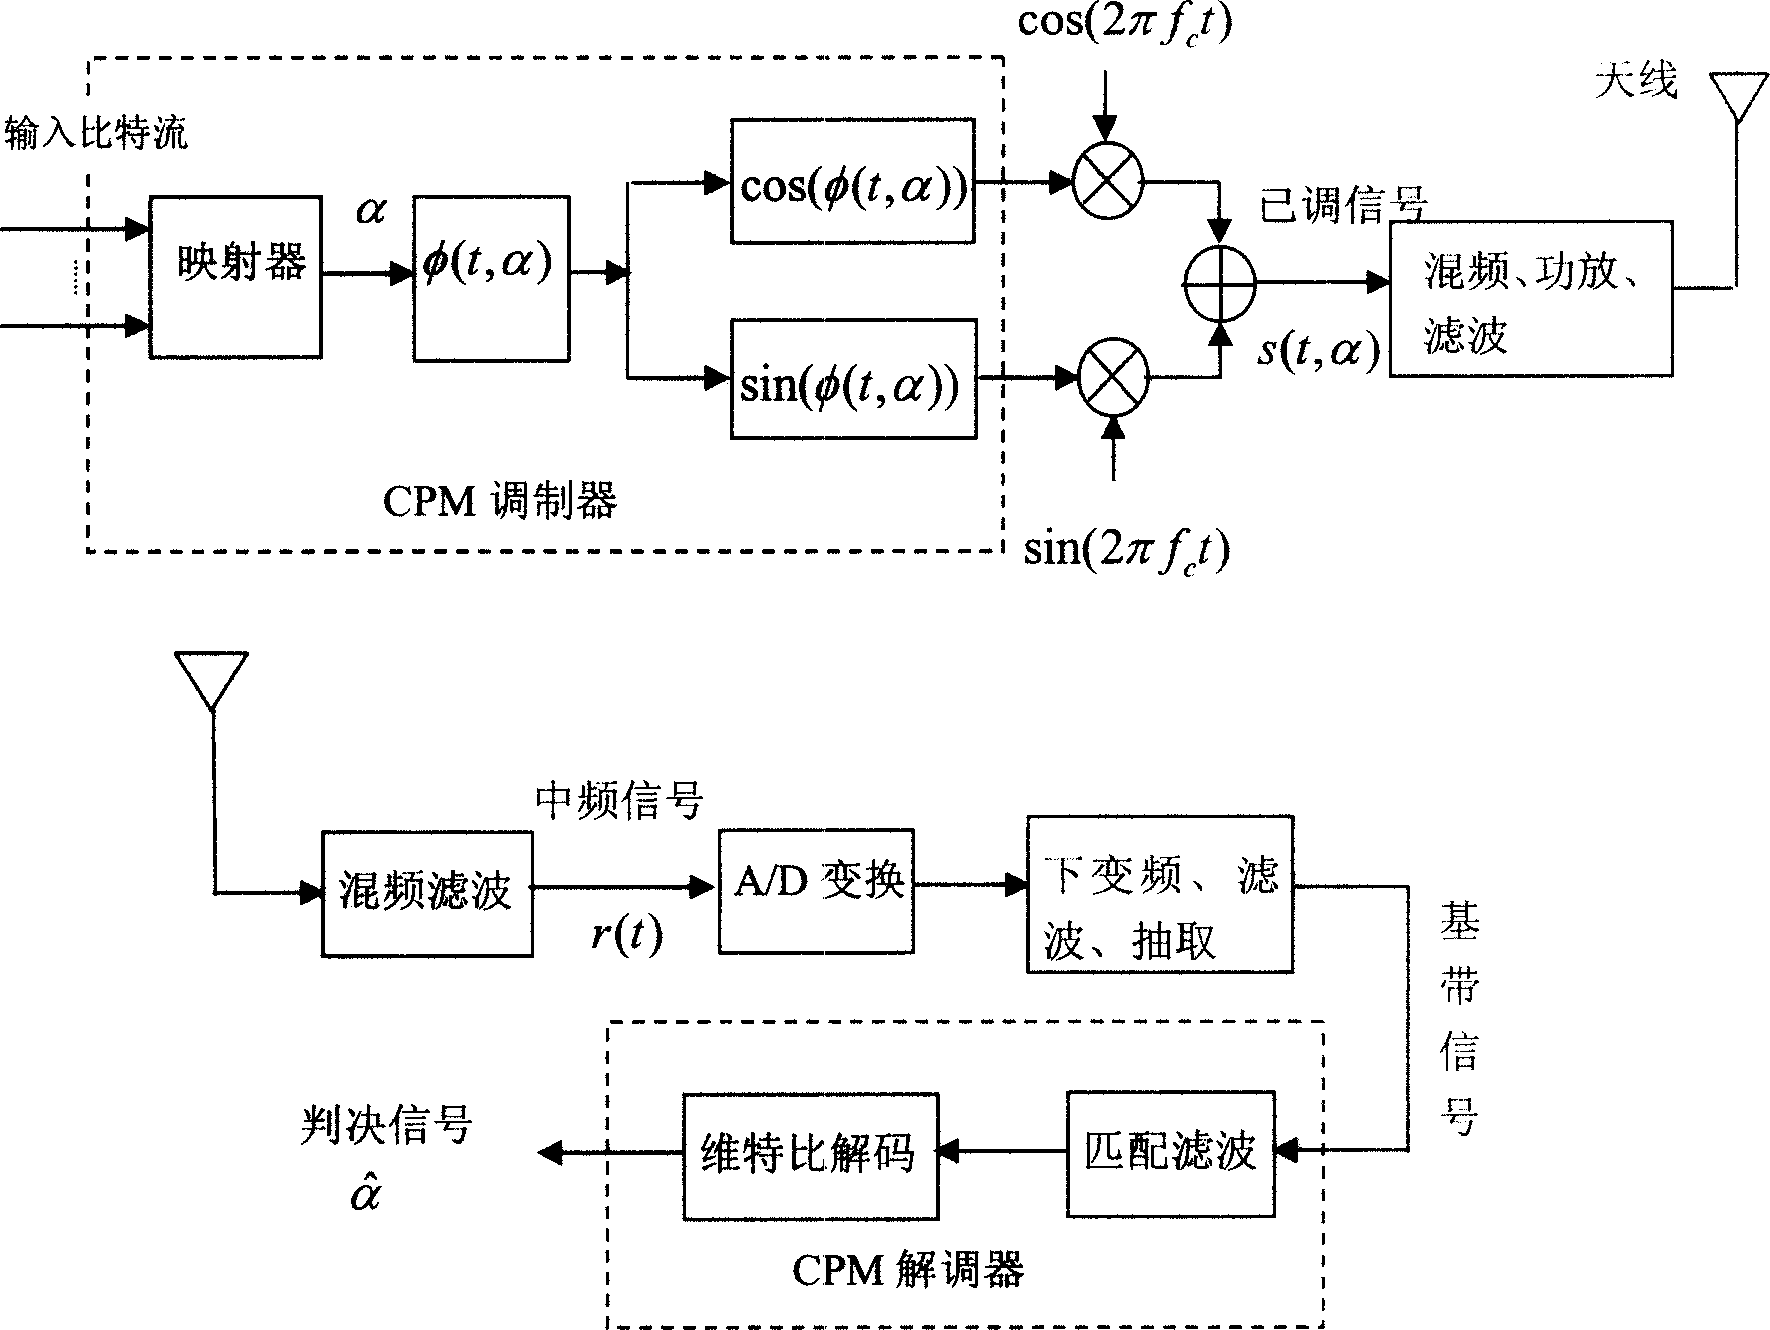 Modulation and demodulation method for continuous phase signals